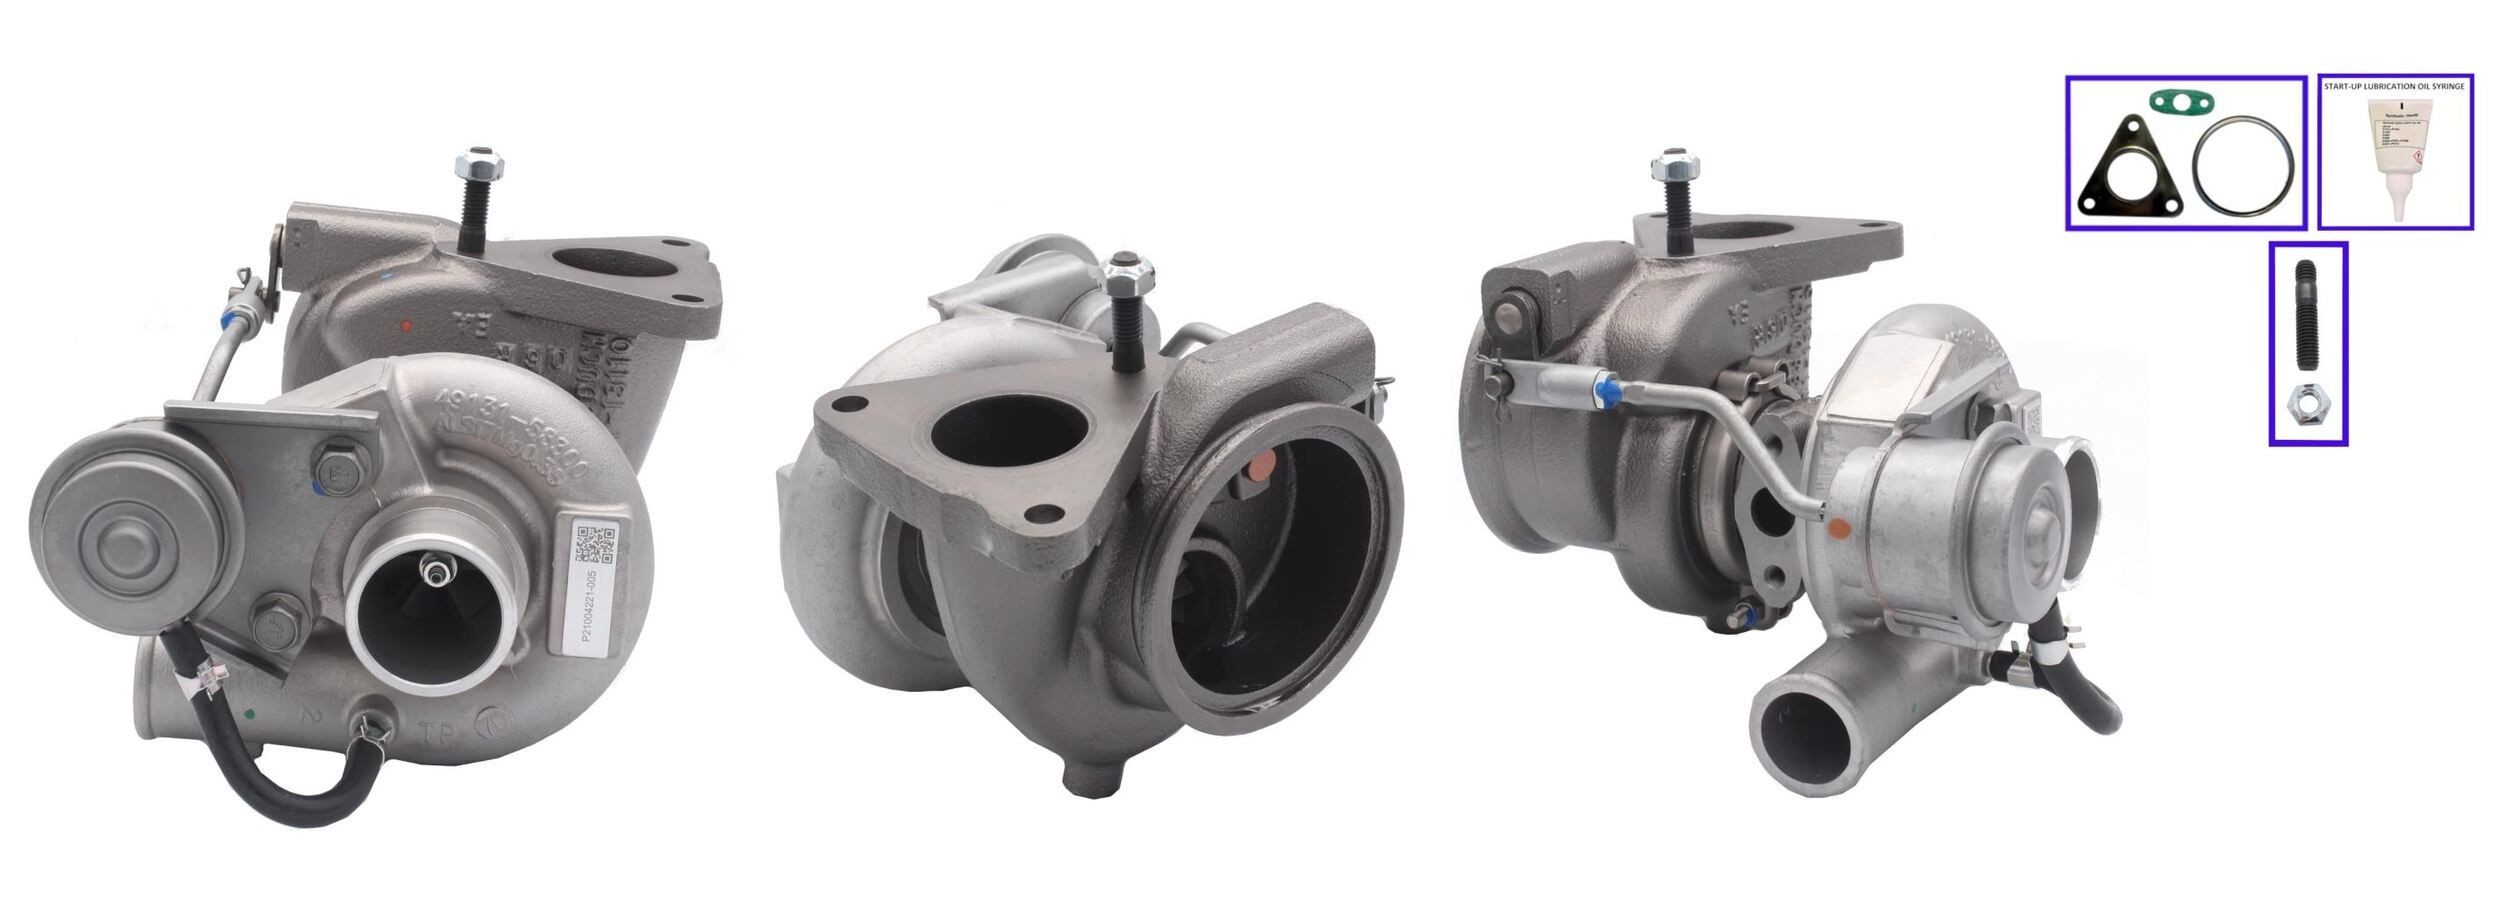 Turbocharger LUCAS Exhaust Turbocharger, Pneumatically controlled actuator, with gaskets/seals - LTRPA4913105210